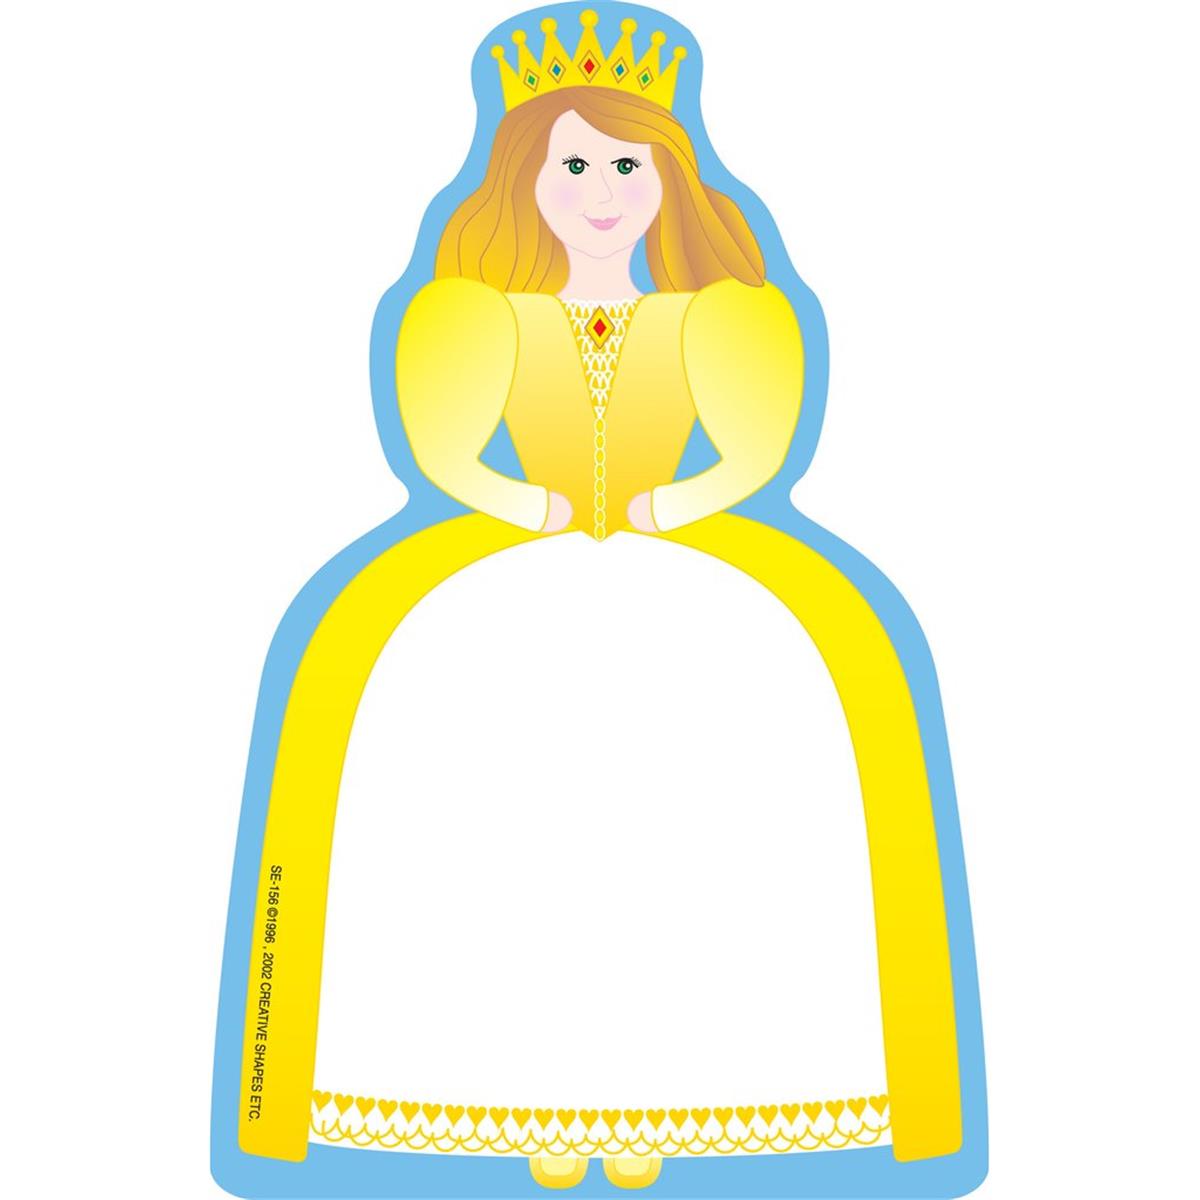 Se-0156 9 X 6 In. Large Notepad, Queen & Princess - 50 Sheets Per Pack